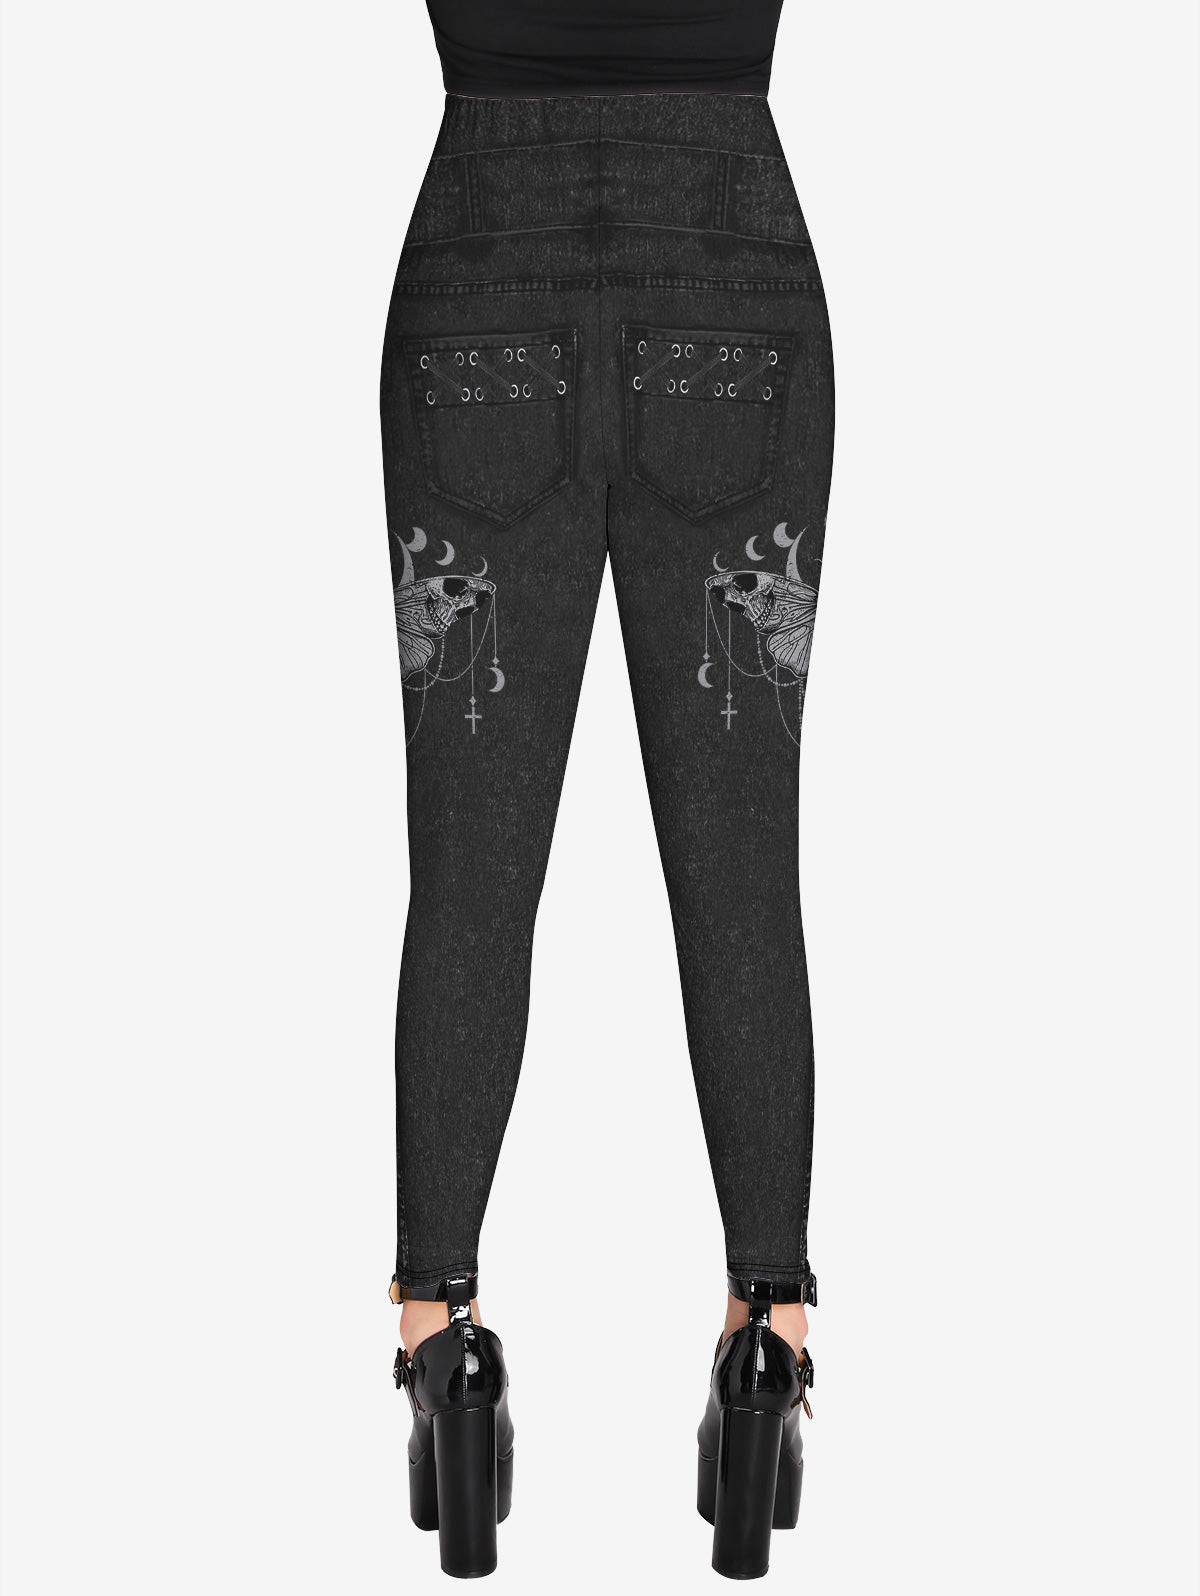 Gothic Wing 3D Jean Print Jeggings